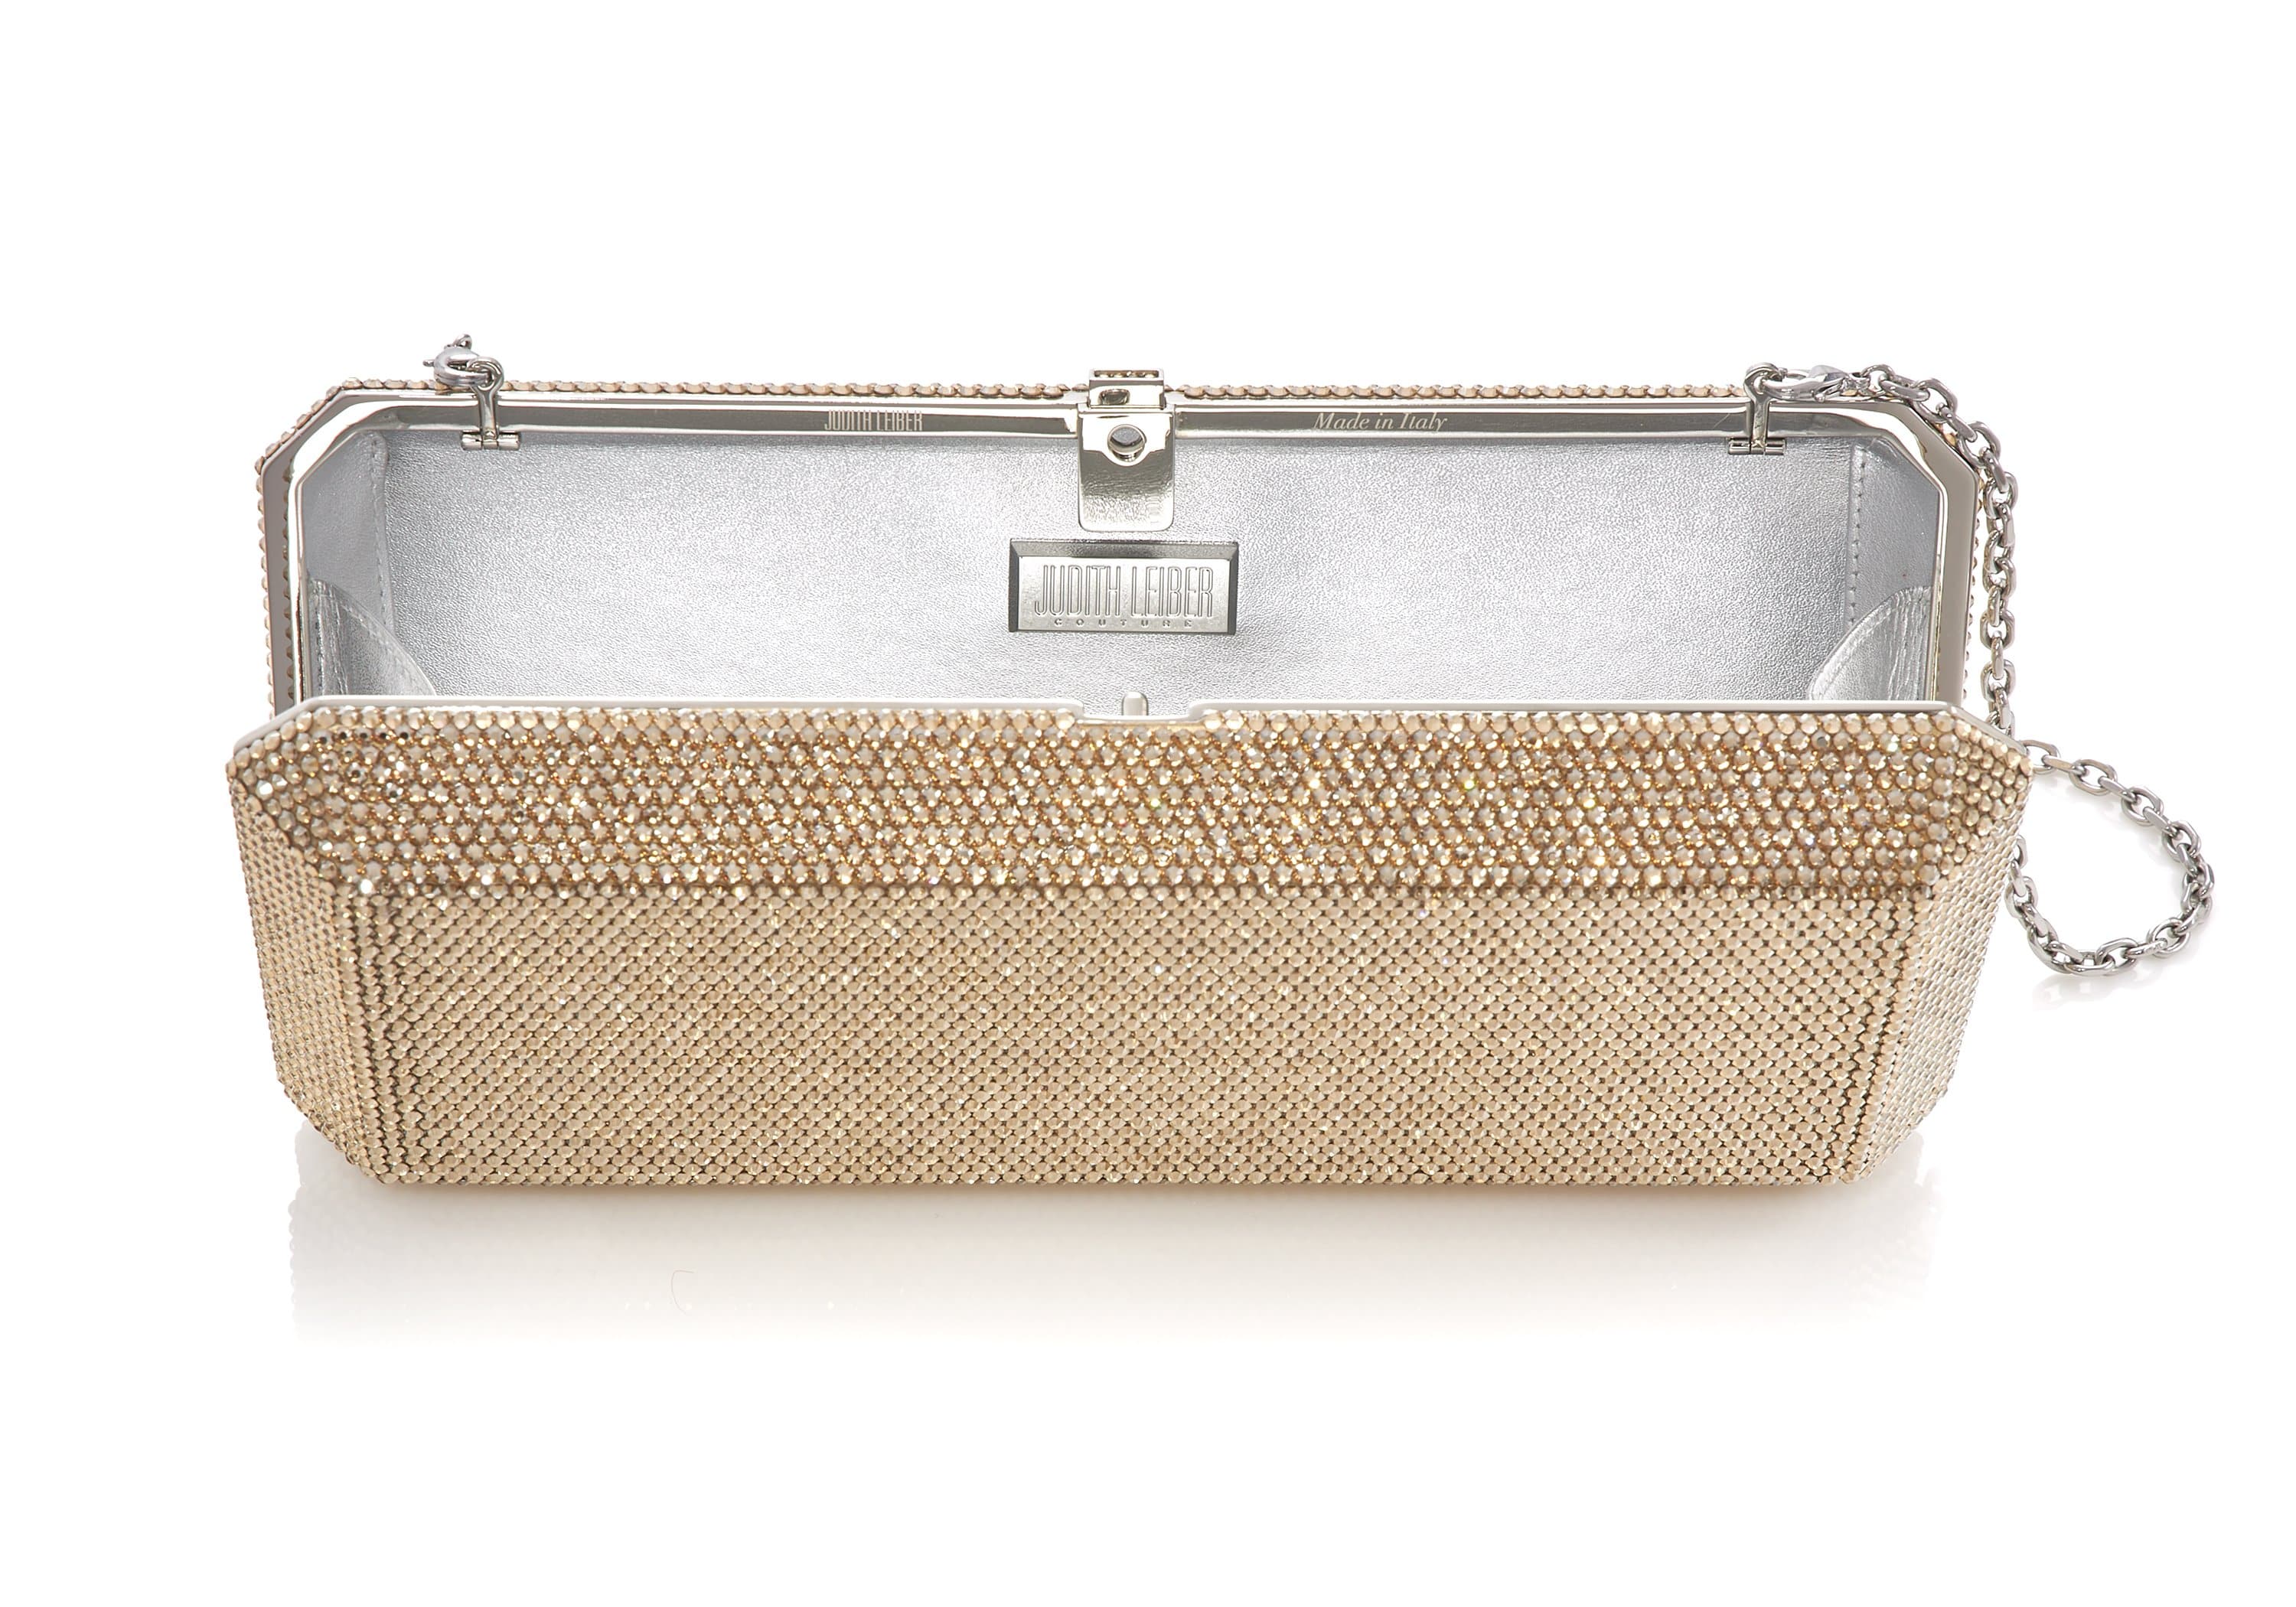 JUDITH LEIBER COUTURE JAZZ AGE CLUTCH BAG IN CHAMPAGNE